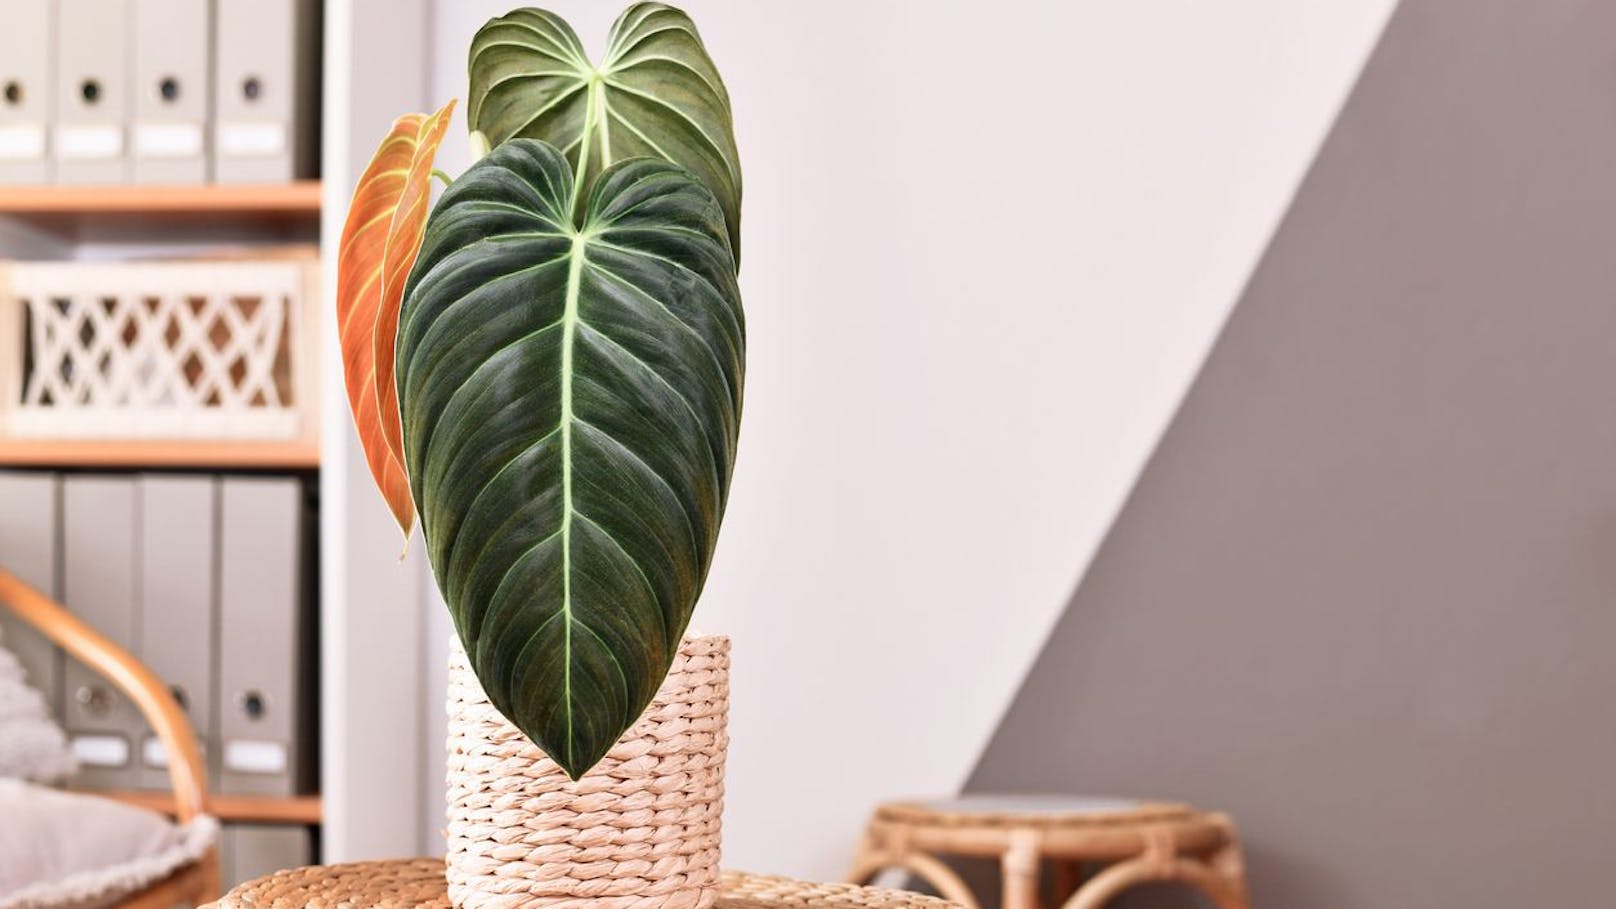 2. Philodendron